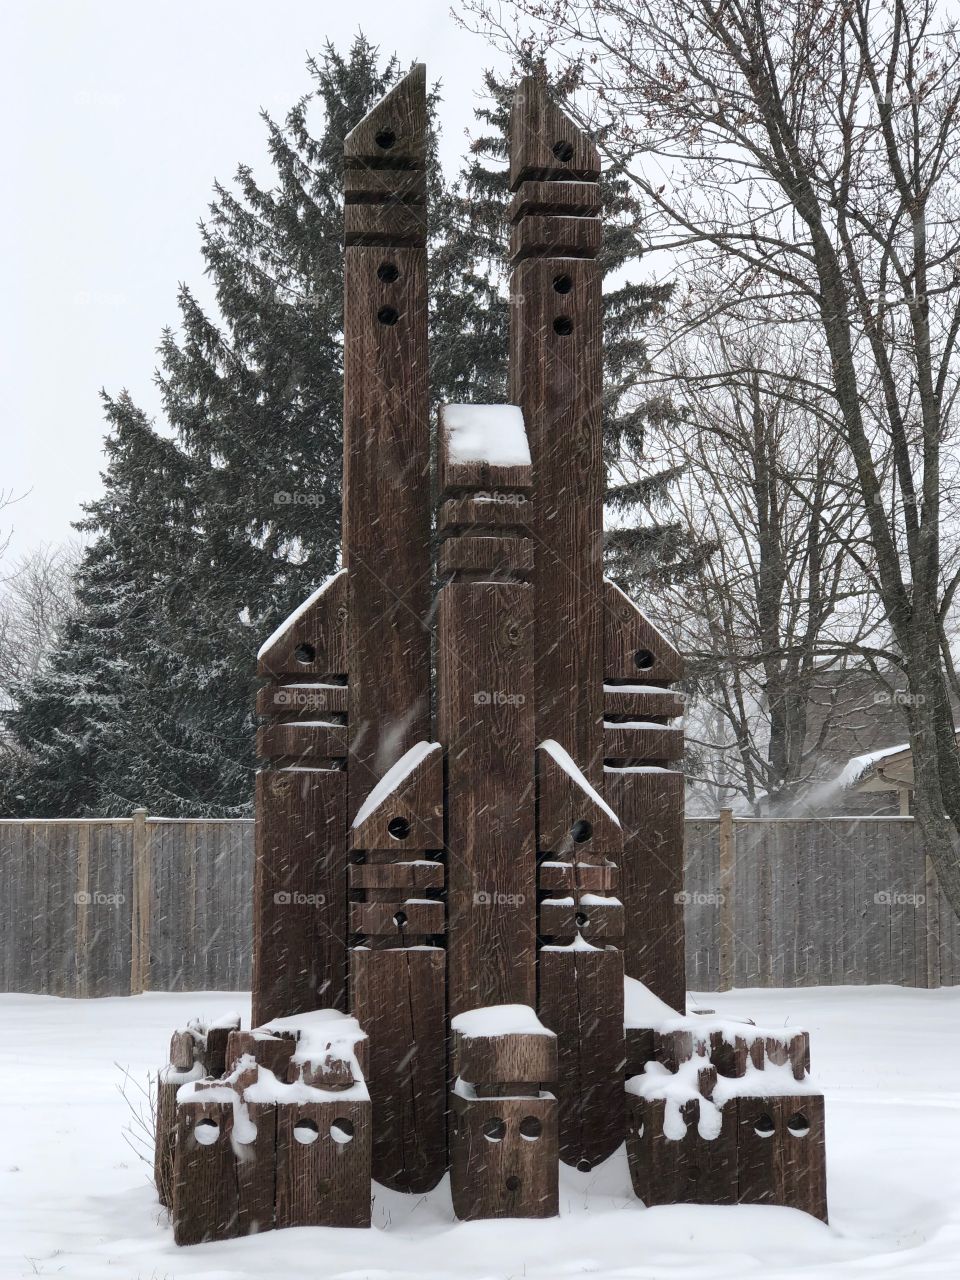 Native artwork in a nearby park. 